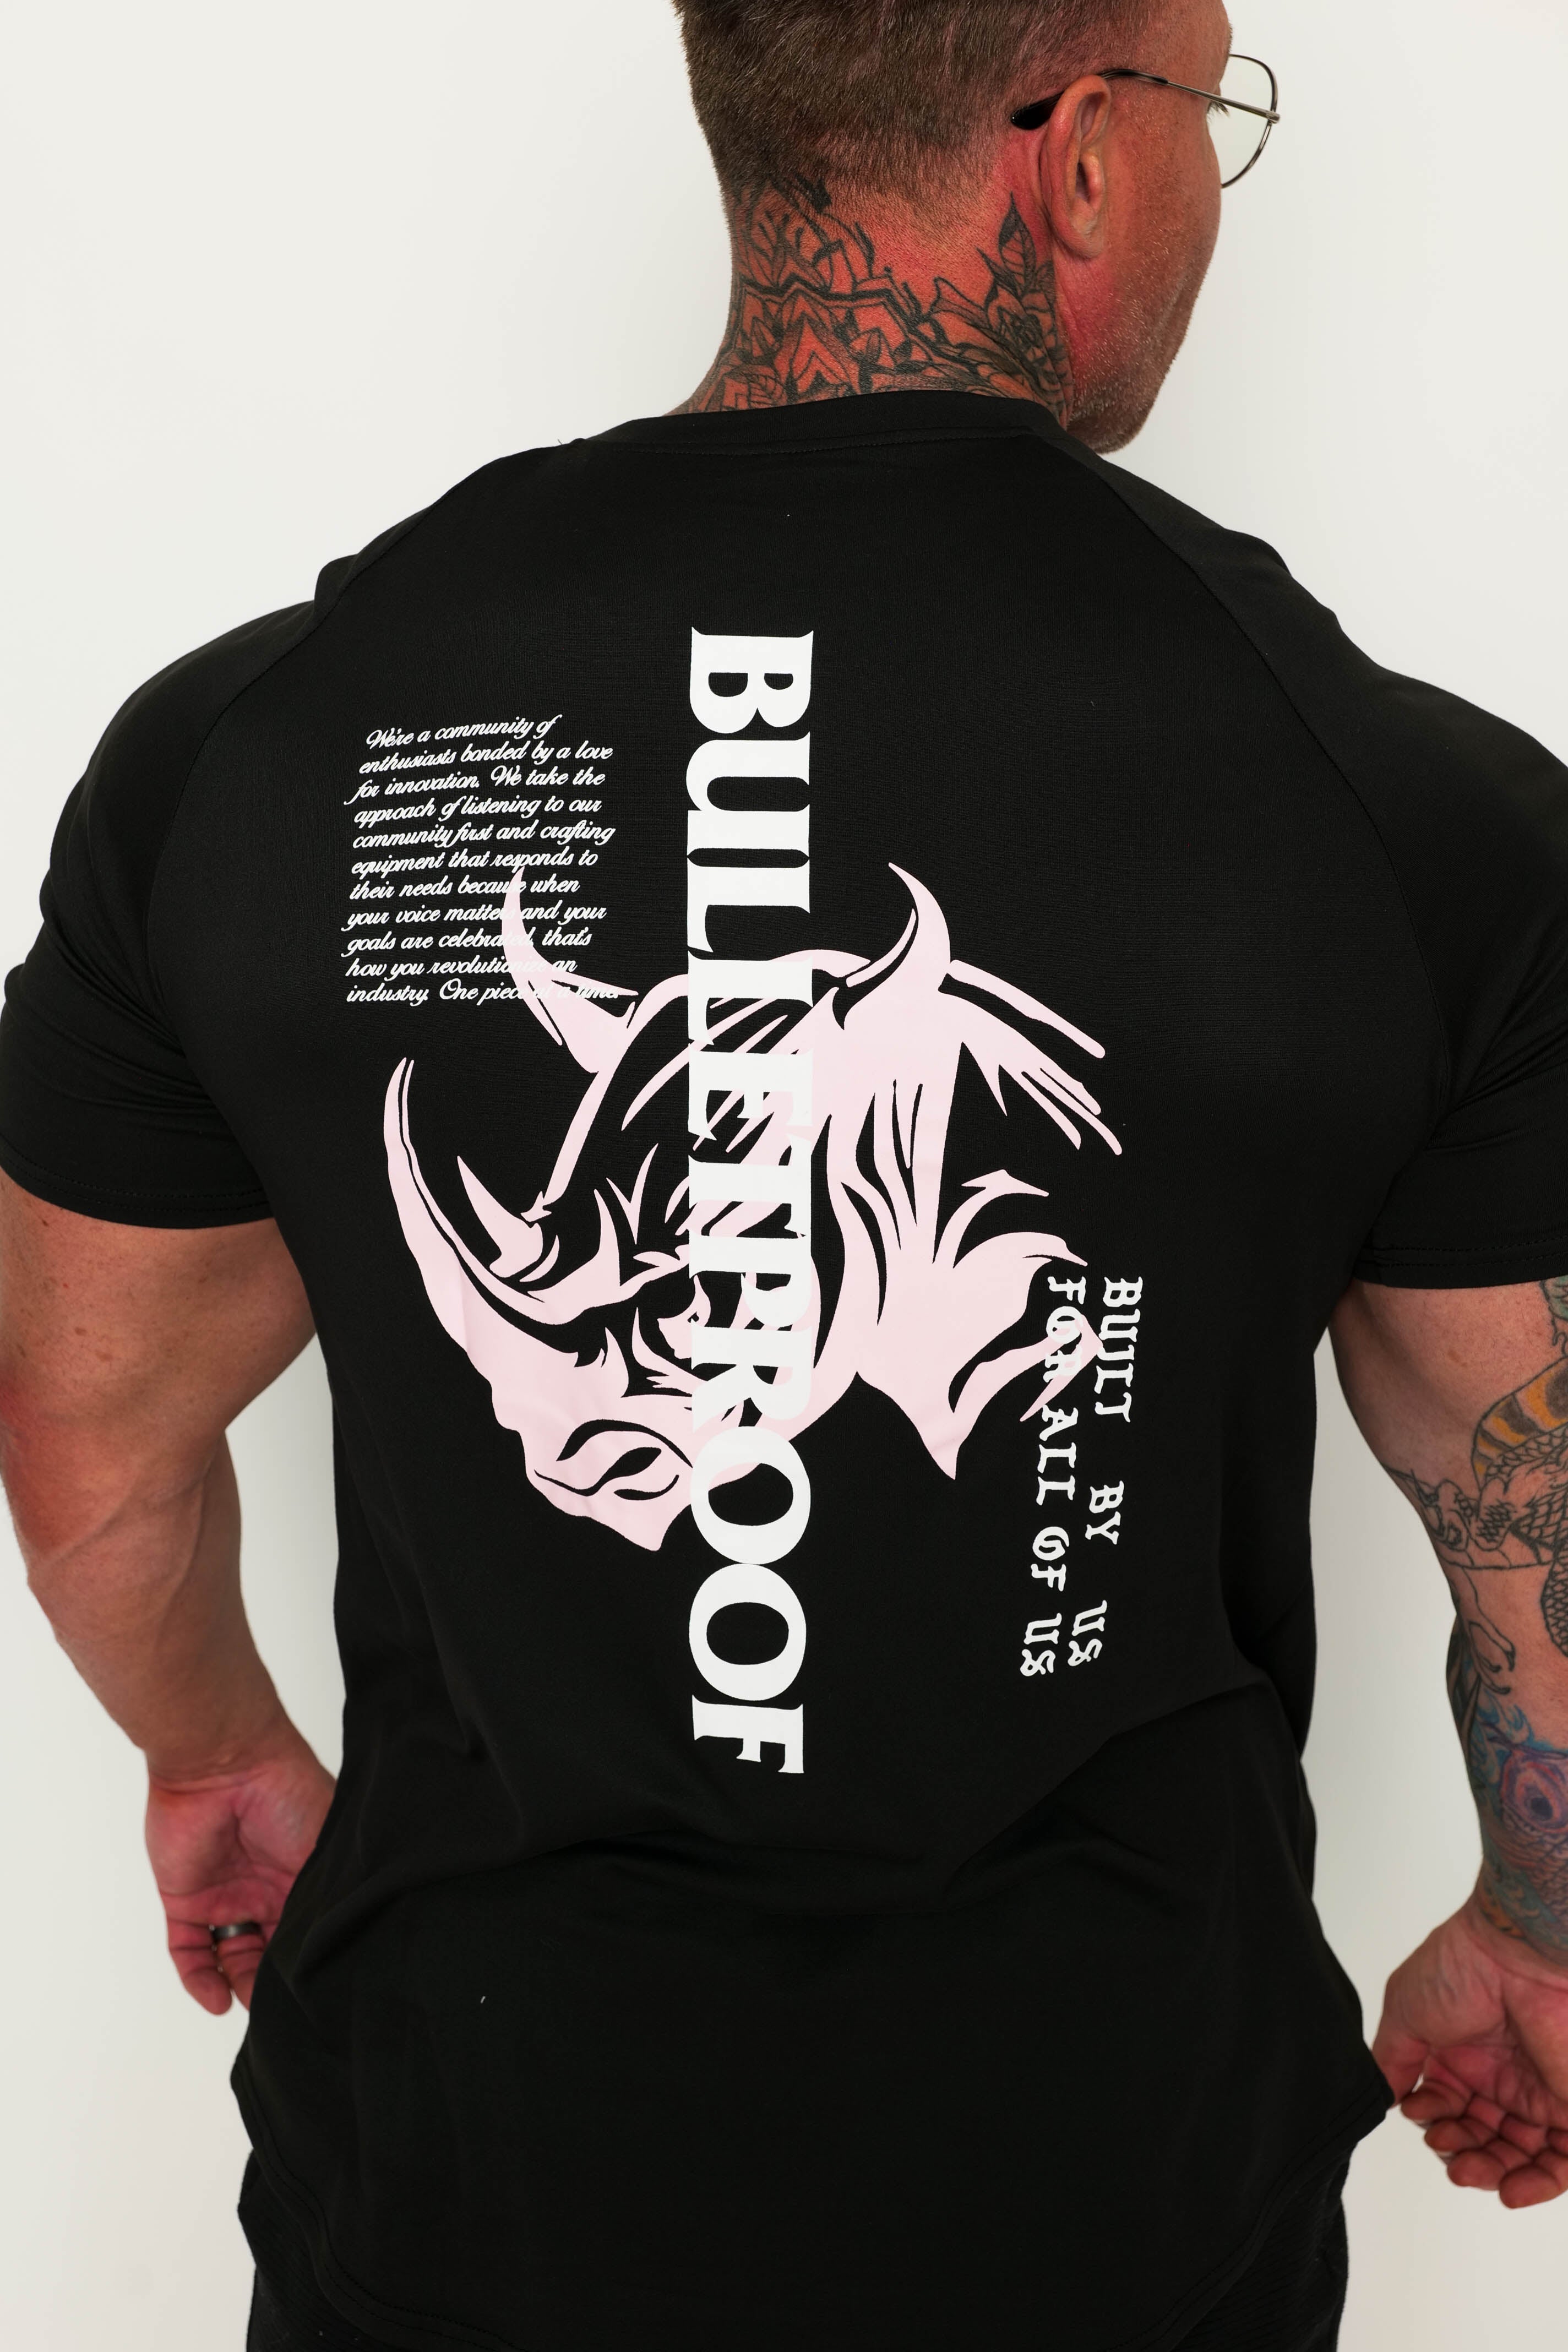 T-SHIRT - Rhino Clan Power Team: Built by Us for Us